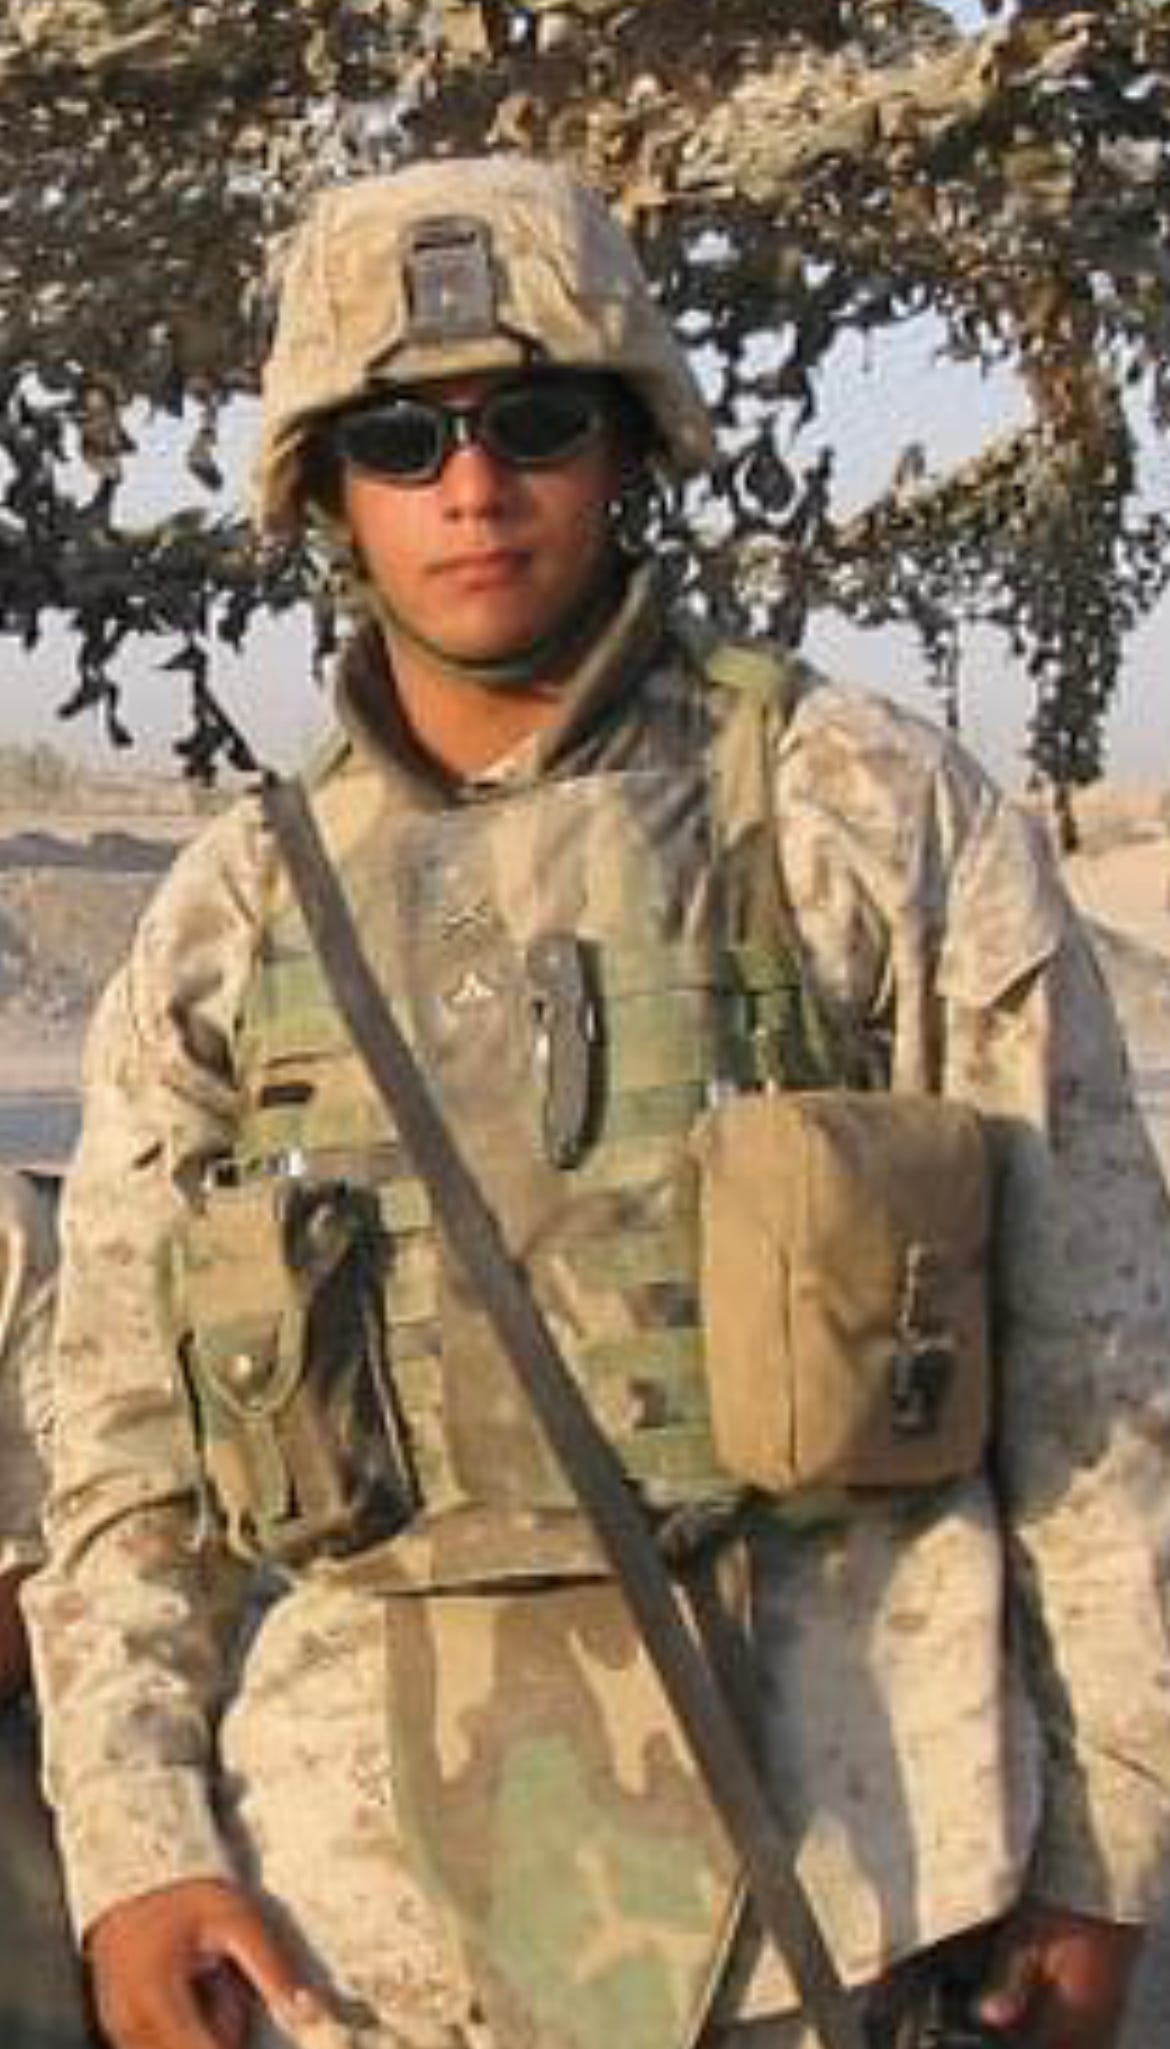 Manny Marrero was 18 and fresh out of Nauset Regional High School when he started U.S. Marine training. In March 2003, he was deployed for the initial invasion of Iraq. He was deployed again in 2004 to Fallujah, where he spent nine months.